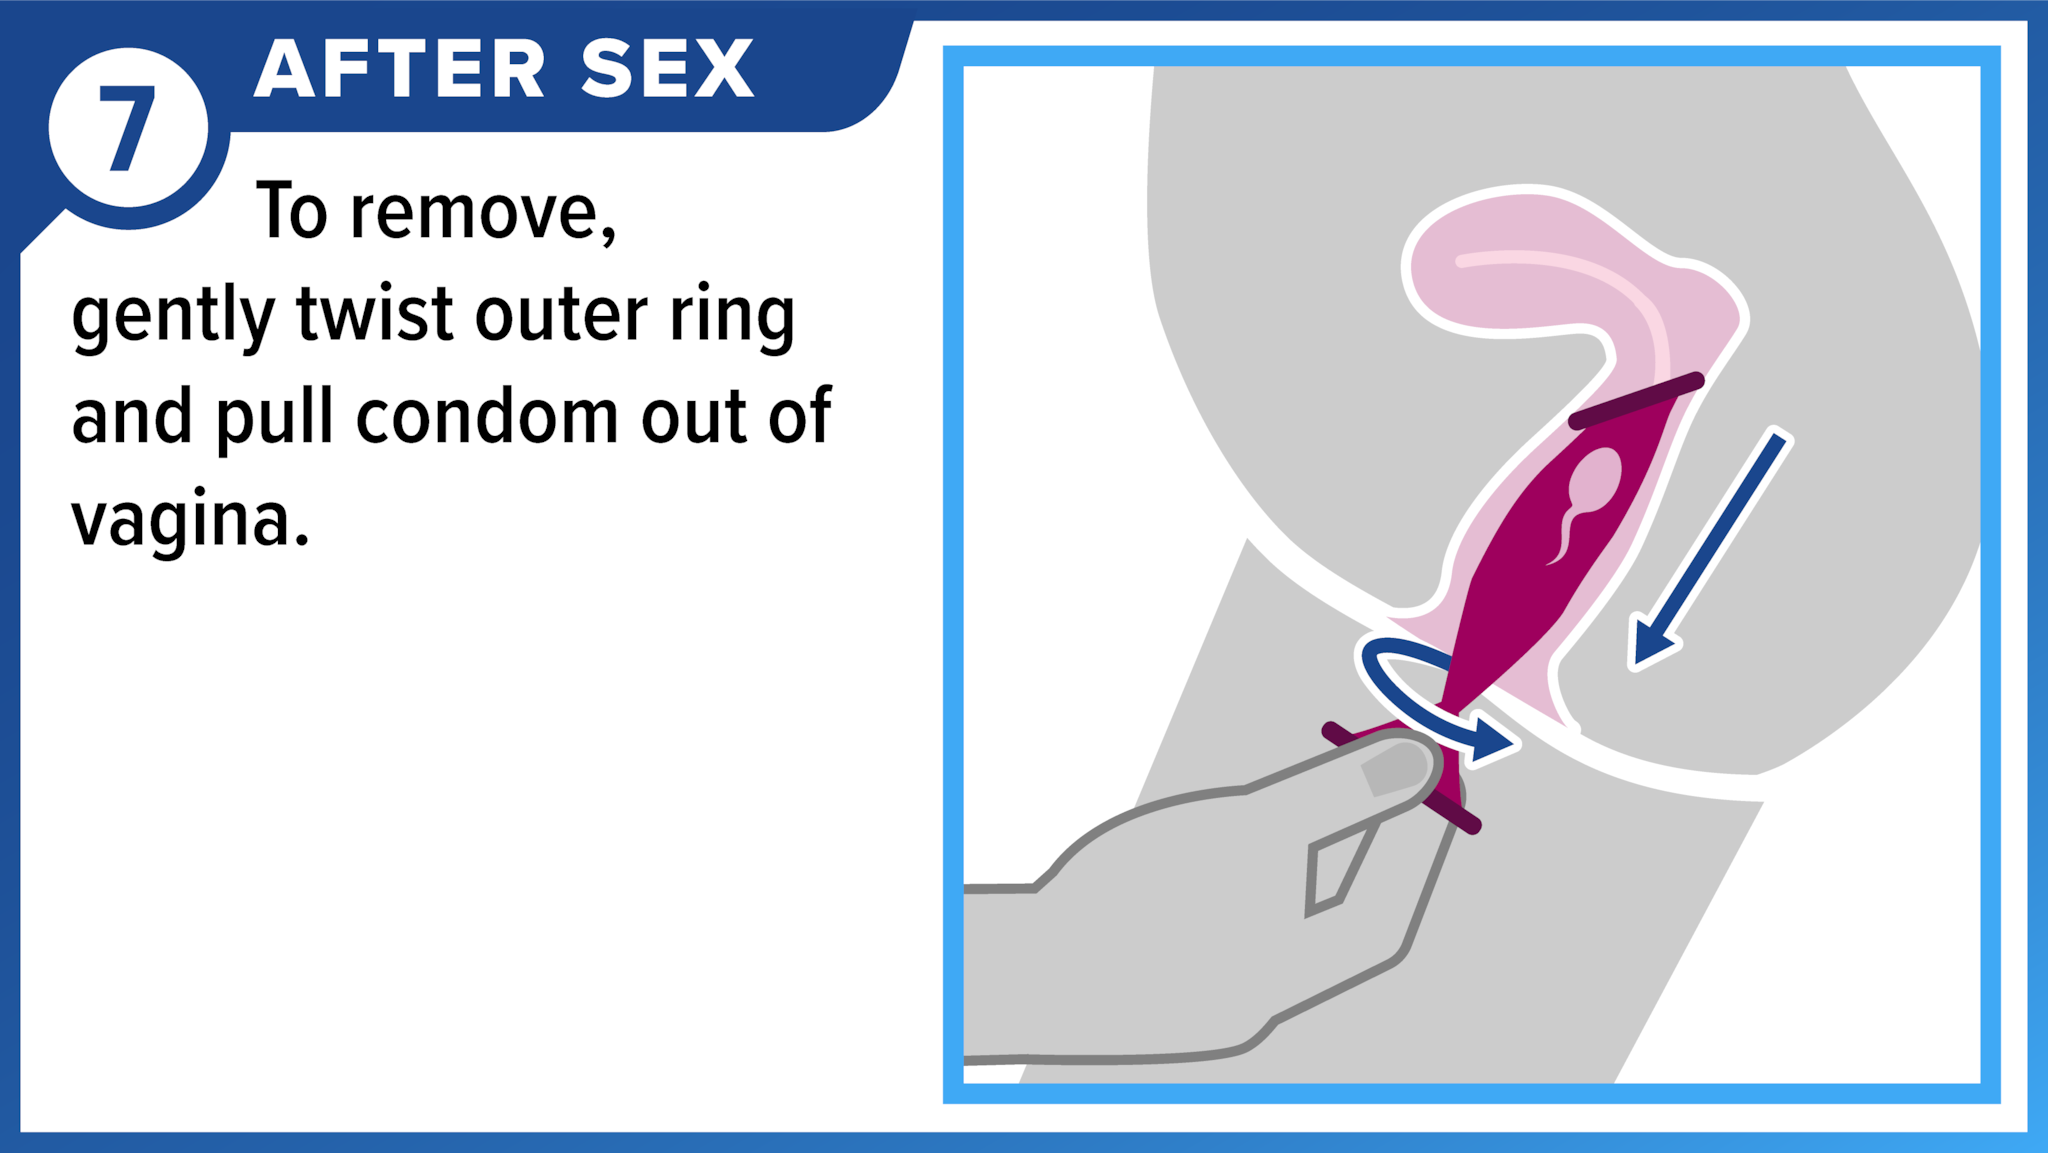 Hand removing female condom. After sex - To remove, gently twist outer ring and pull condom out of vagina.